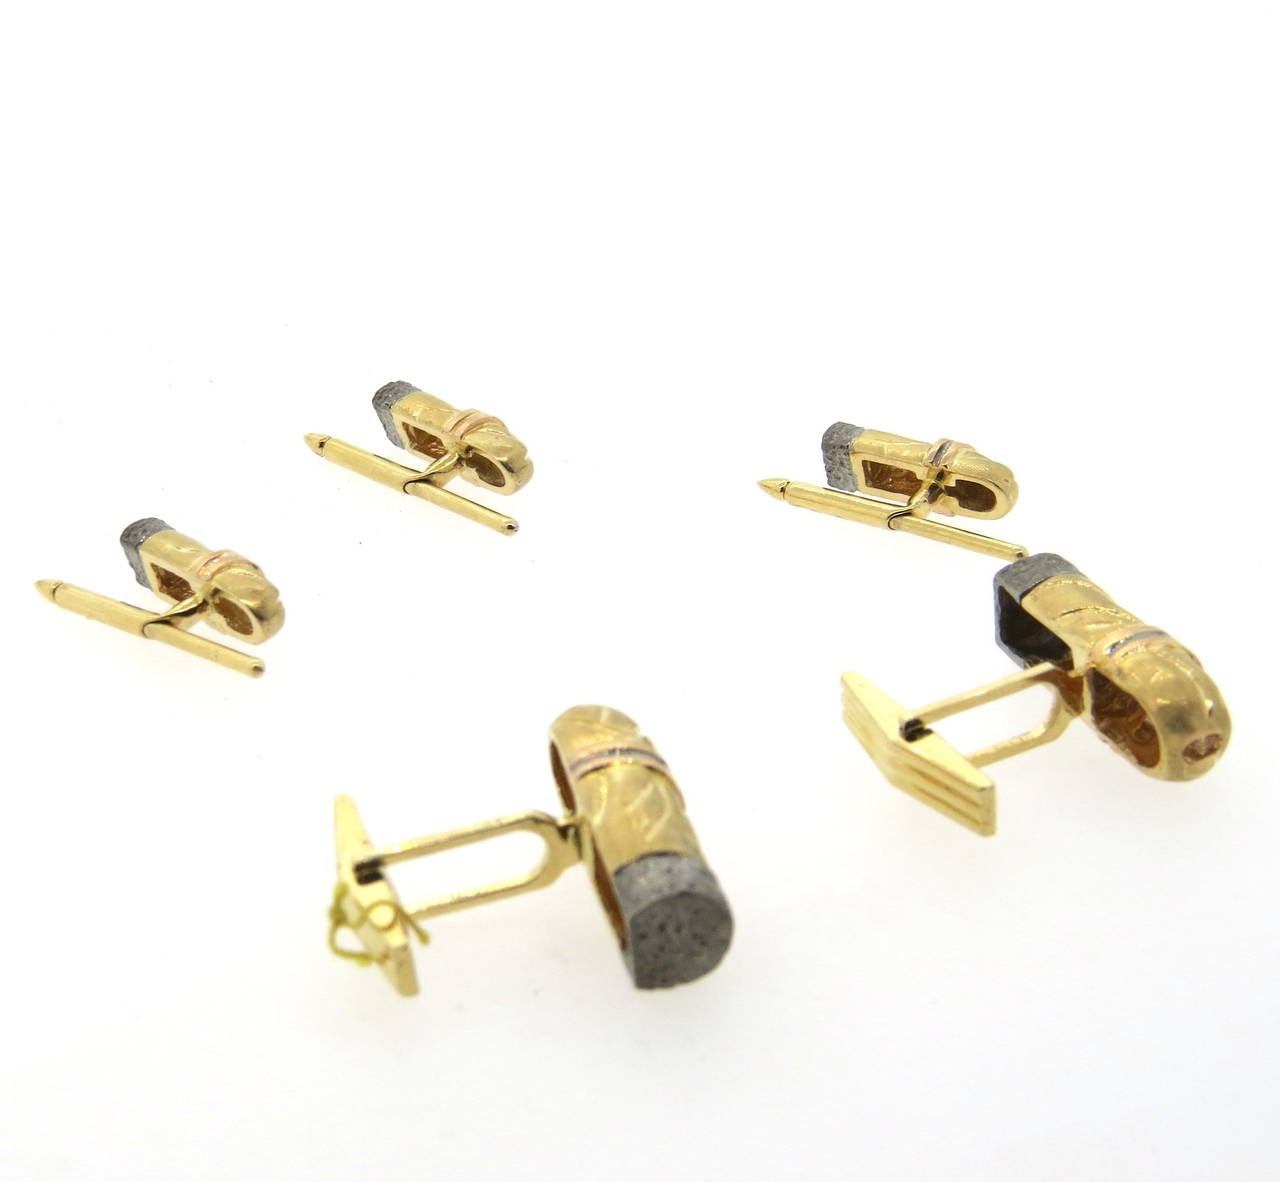 A 14k gold cufflinks and studs set depicting cigars, set with approximately 0.18ctw of H/VS diamonds.  The cufflinks measure 26mm x 9mm and the studs measure 18mm x 7mm. The set weighs 32 grams.  Marked 14k